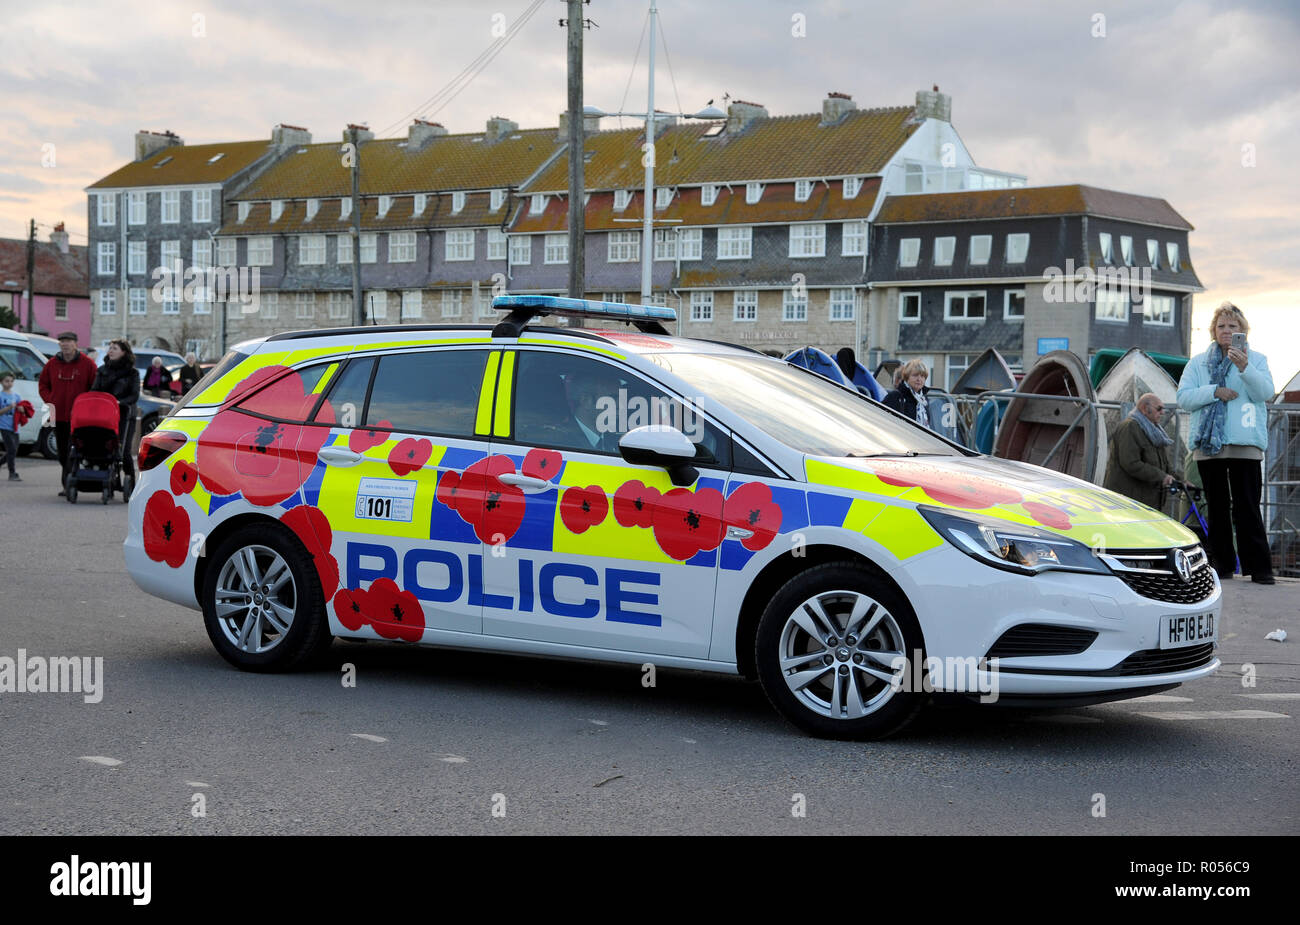 Poppy decorated Police car showing the force's support to the Royal British Legion's annual appeal makes an appearance in West Bay Credit: Finnbarr Webster/Alamy Live News Stock Photo